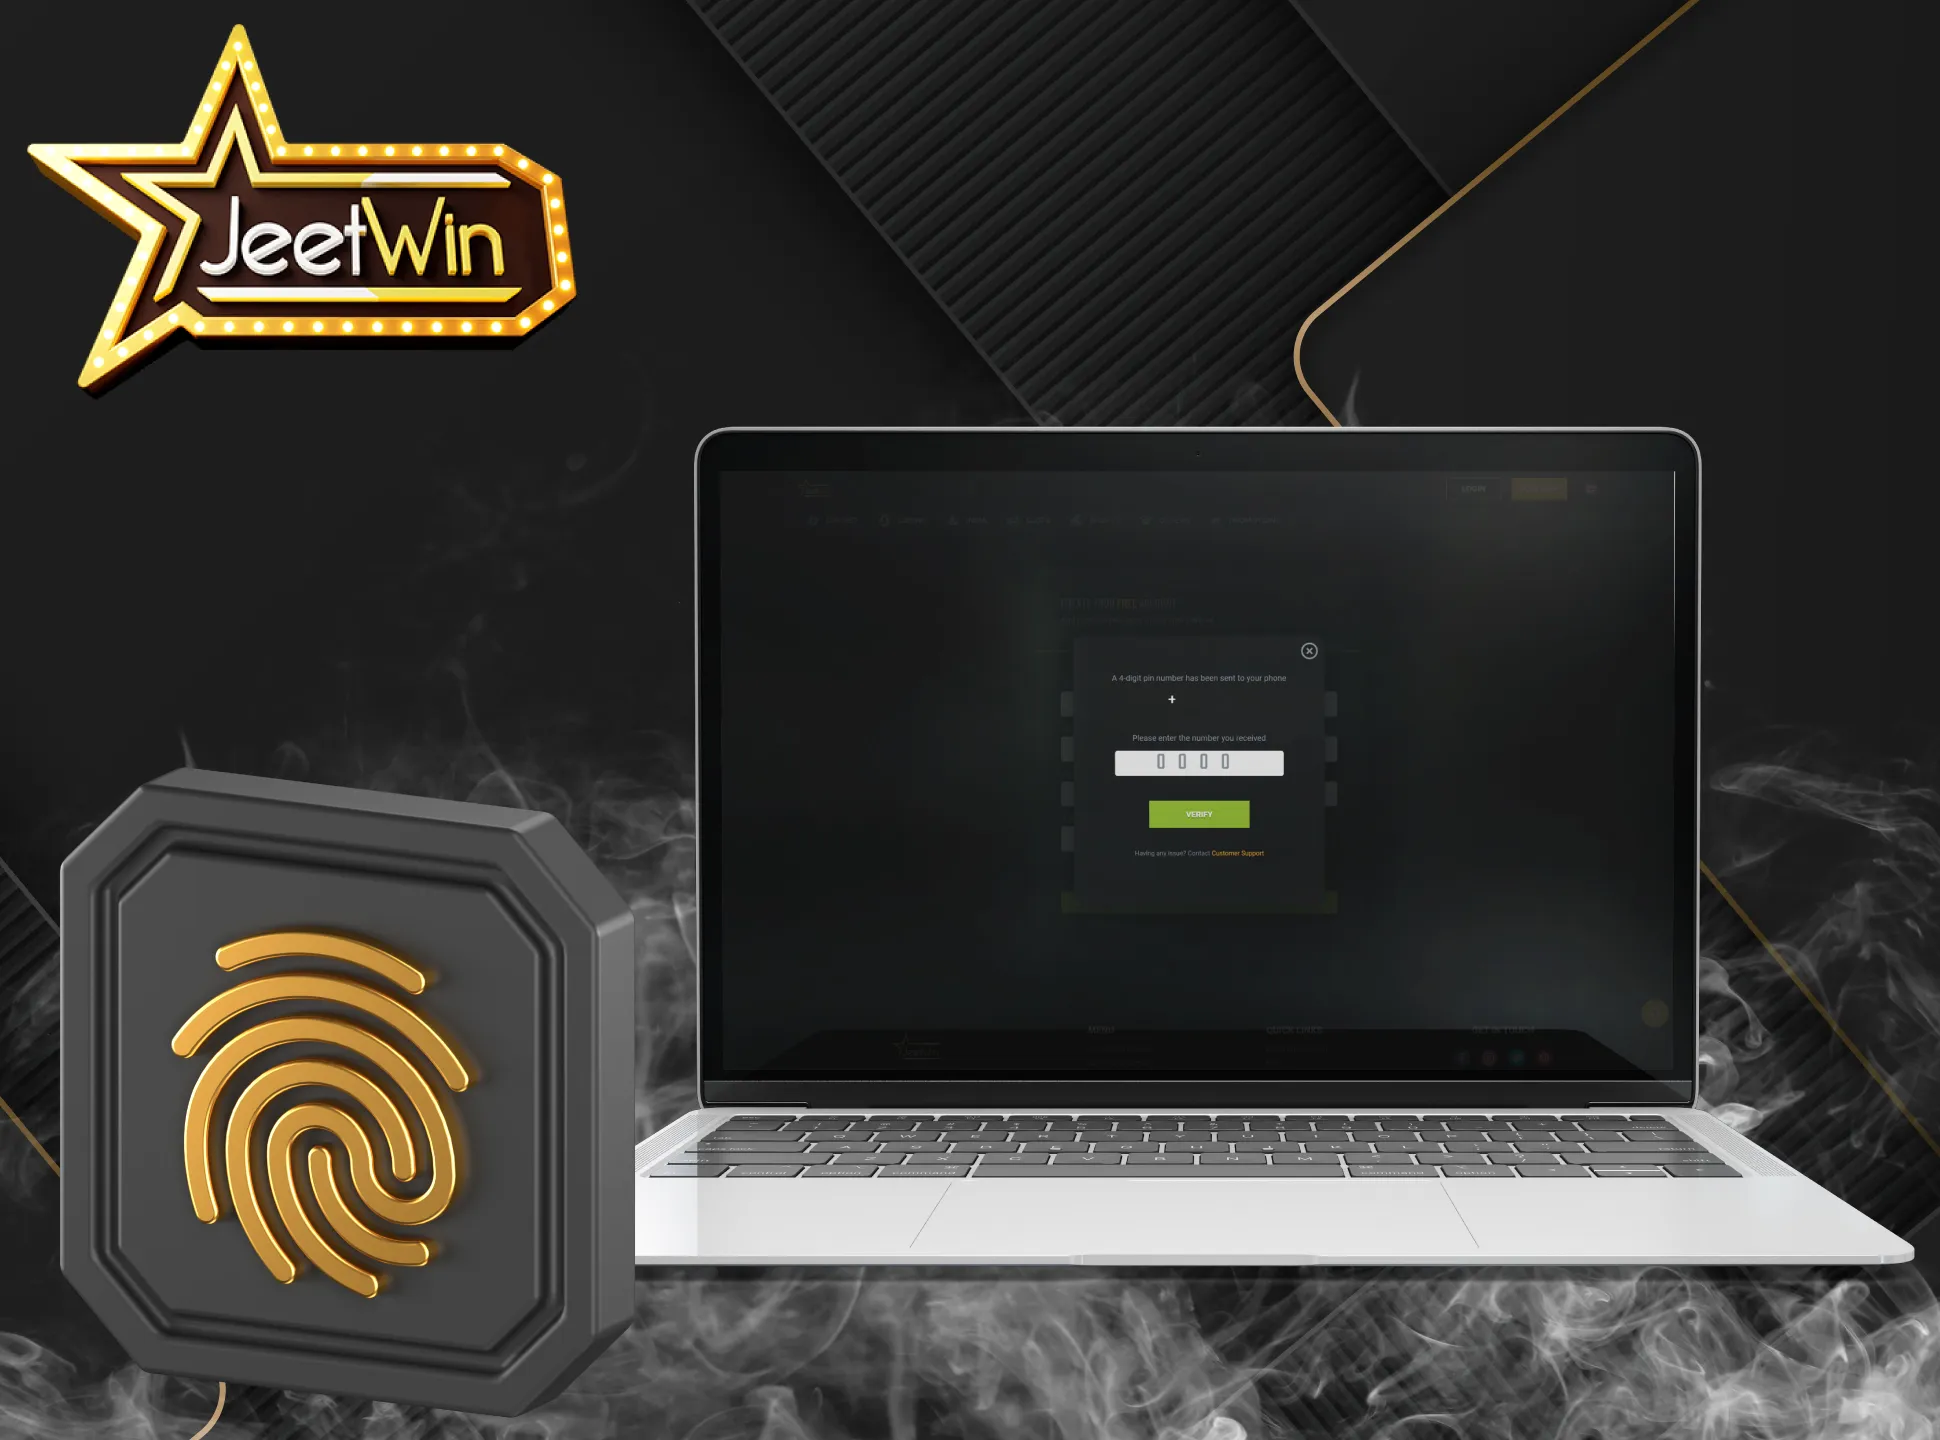 To complete the process of registering an account on JeetWin you must go through a verification process.